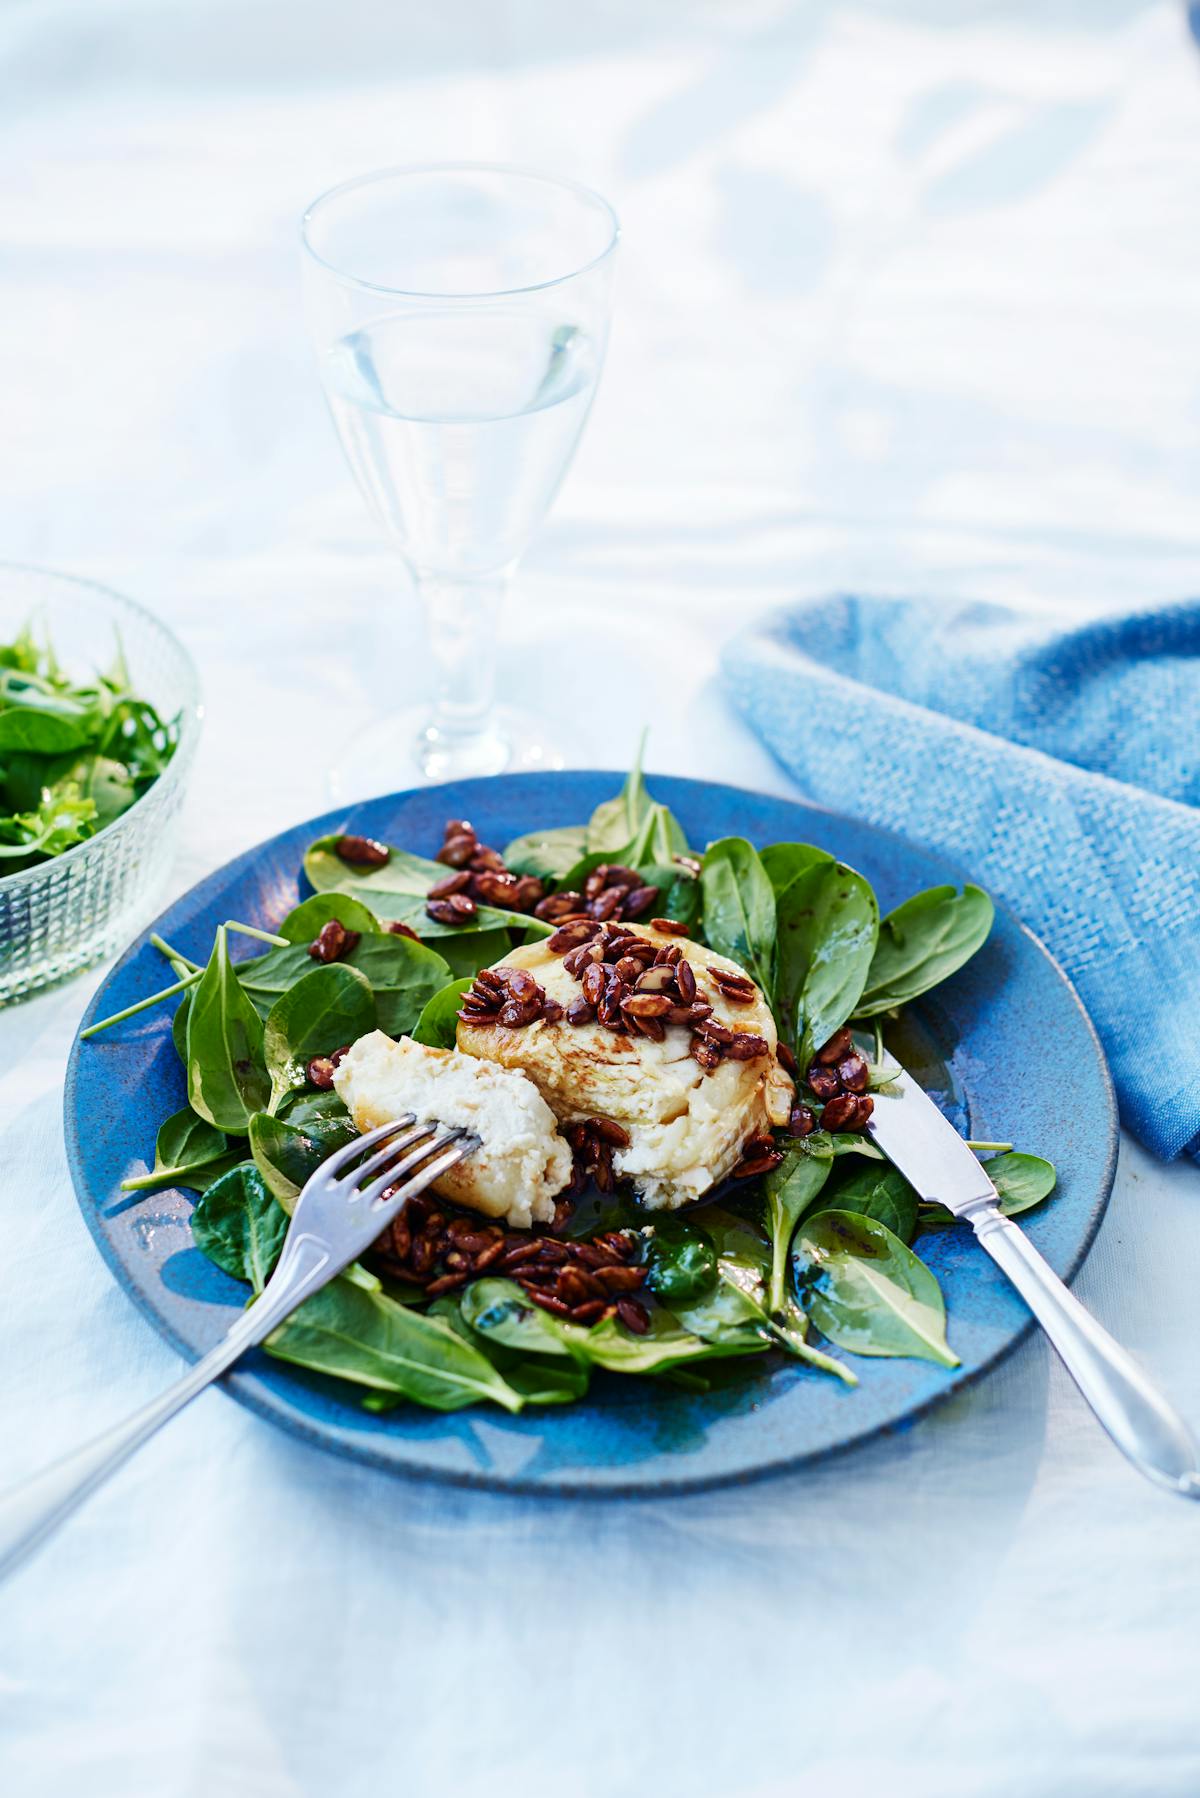 Goat cheese salad with balsamico butter